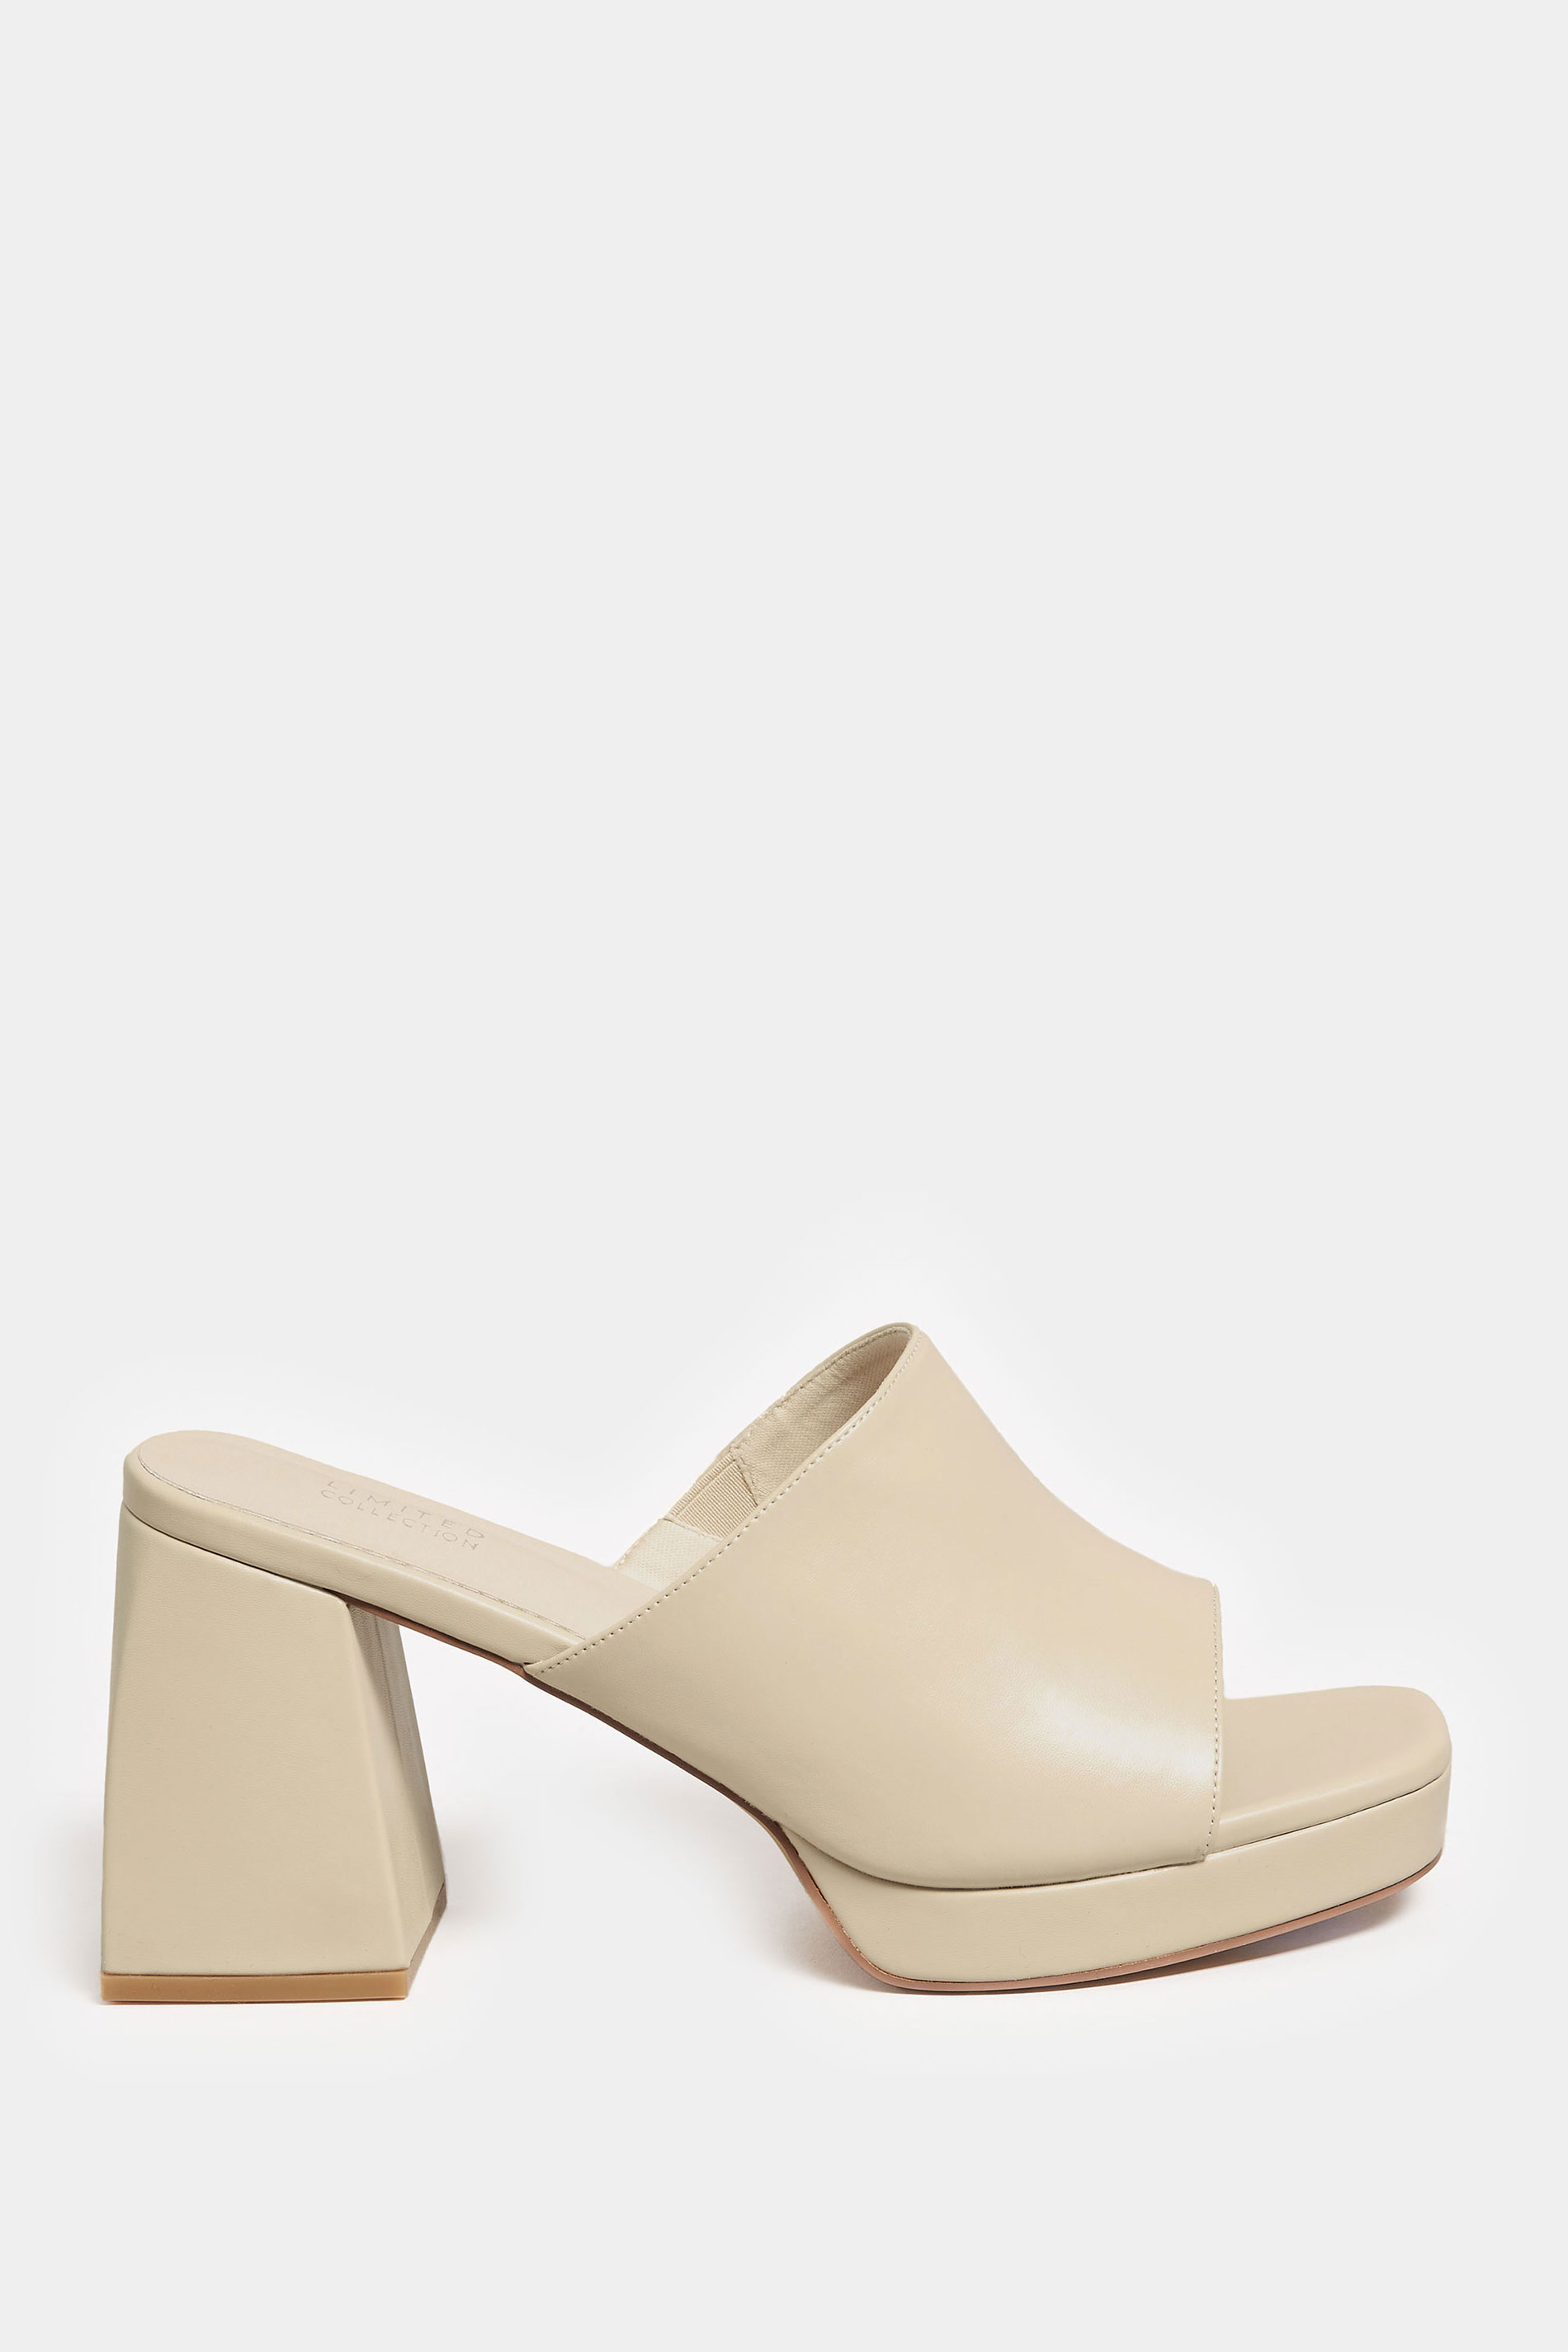 LIMITED COLLECTION Cream Platform Block Mule Sandal Heels In Wide E Fit | Yours Clothing  3